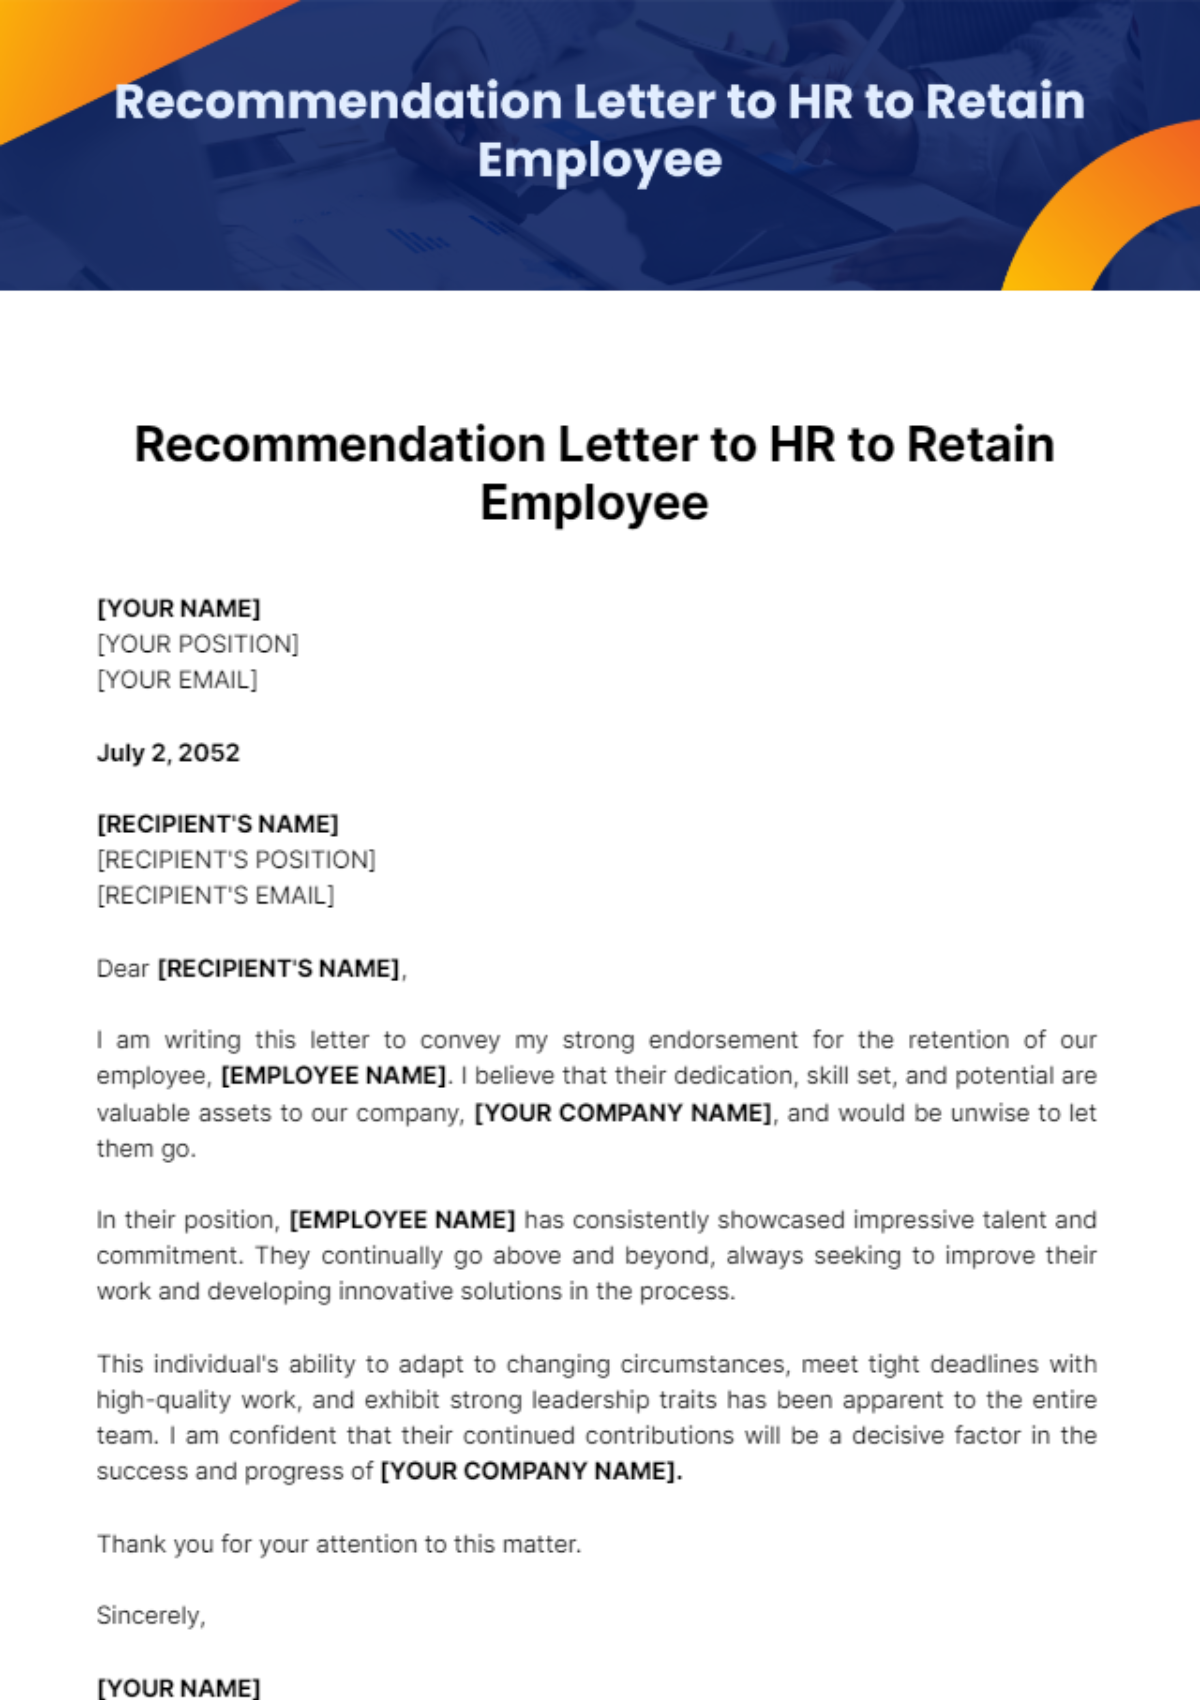 Recommendation Letter to HR to Retain Employee Template